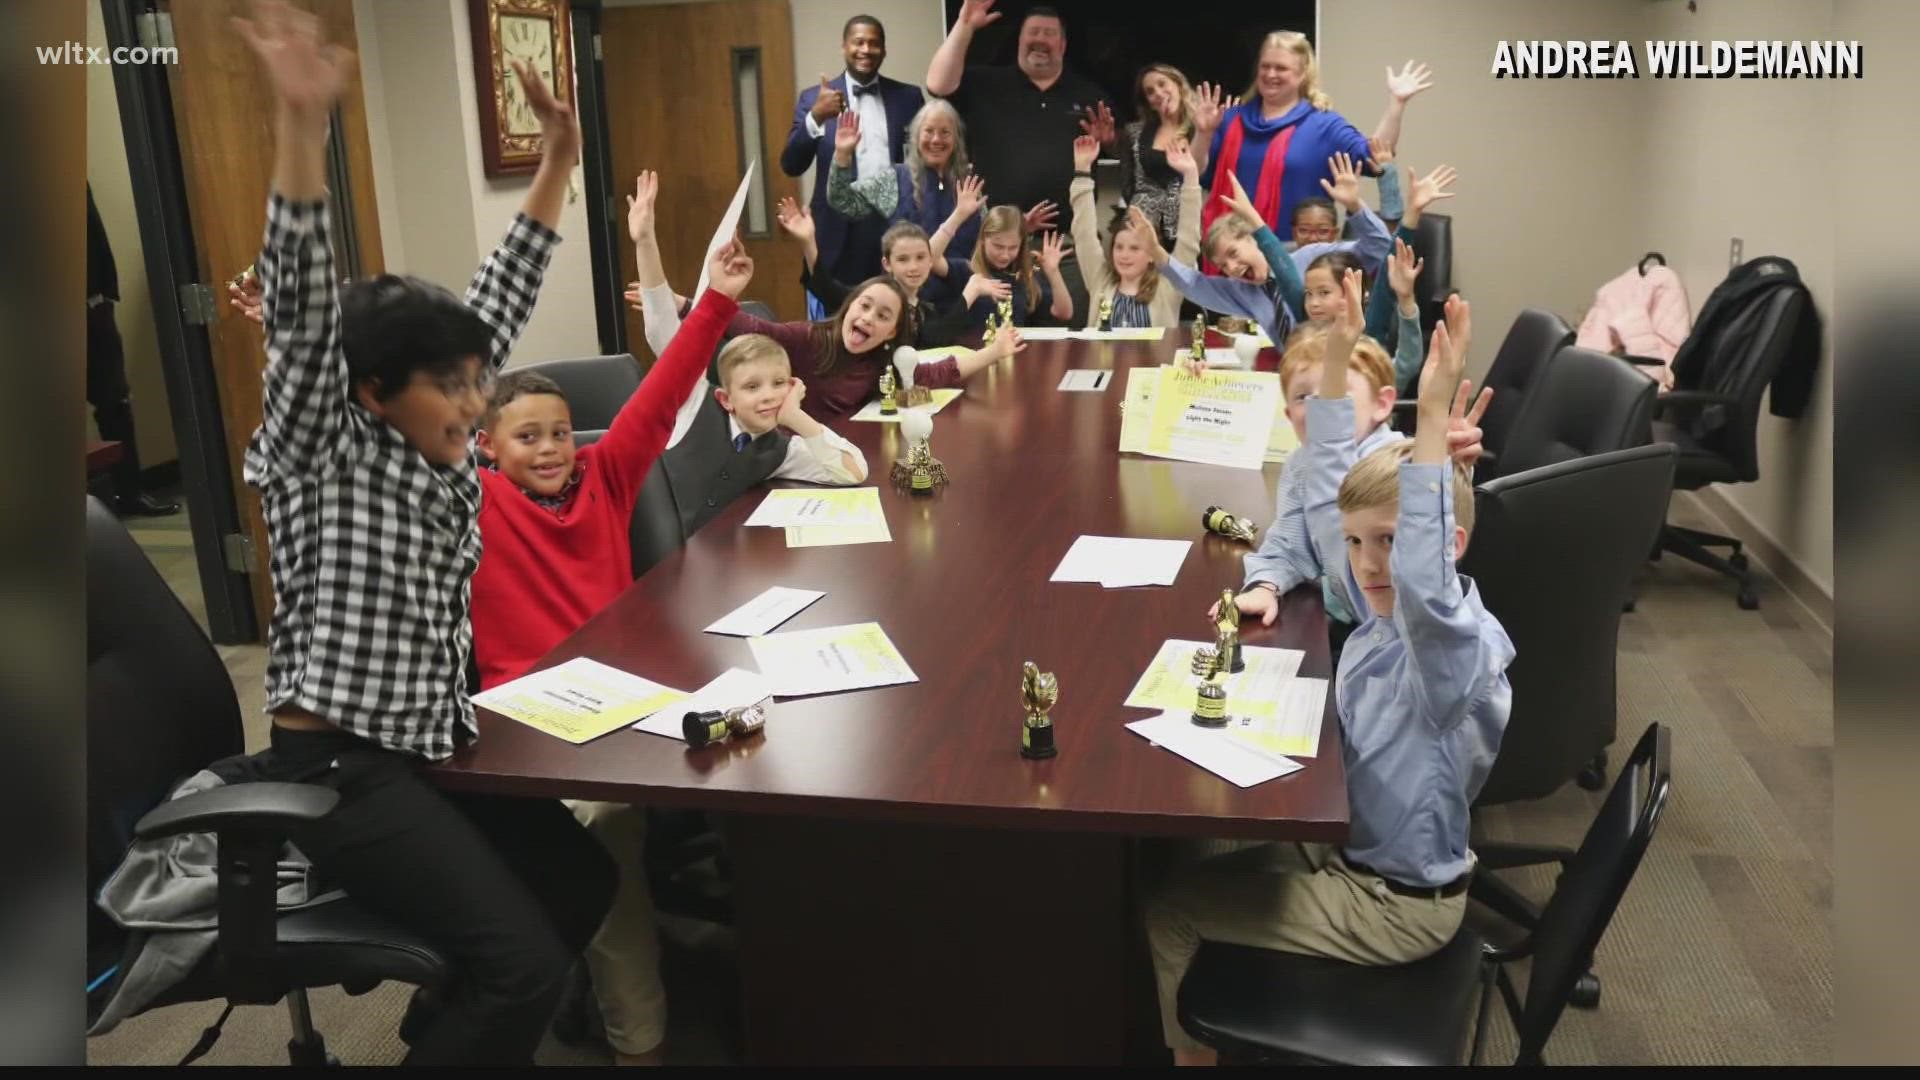 The program is available to all elementary students in South Carolina and the program, "The Entrepreneurship Challenge" and was started by a woman in Irmo.